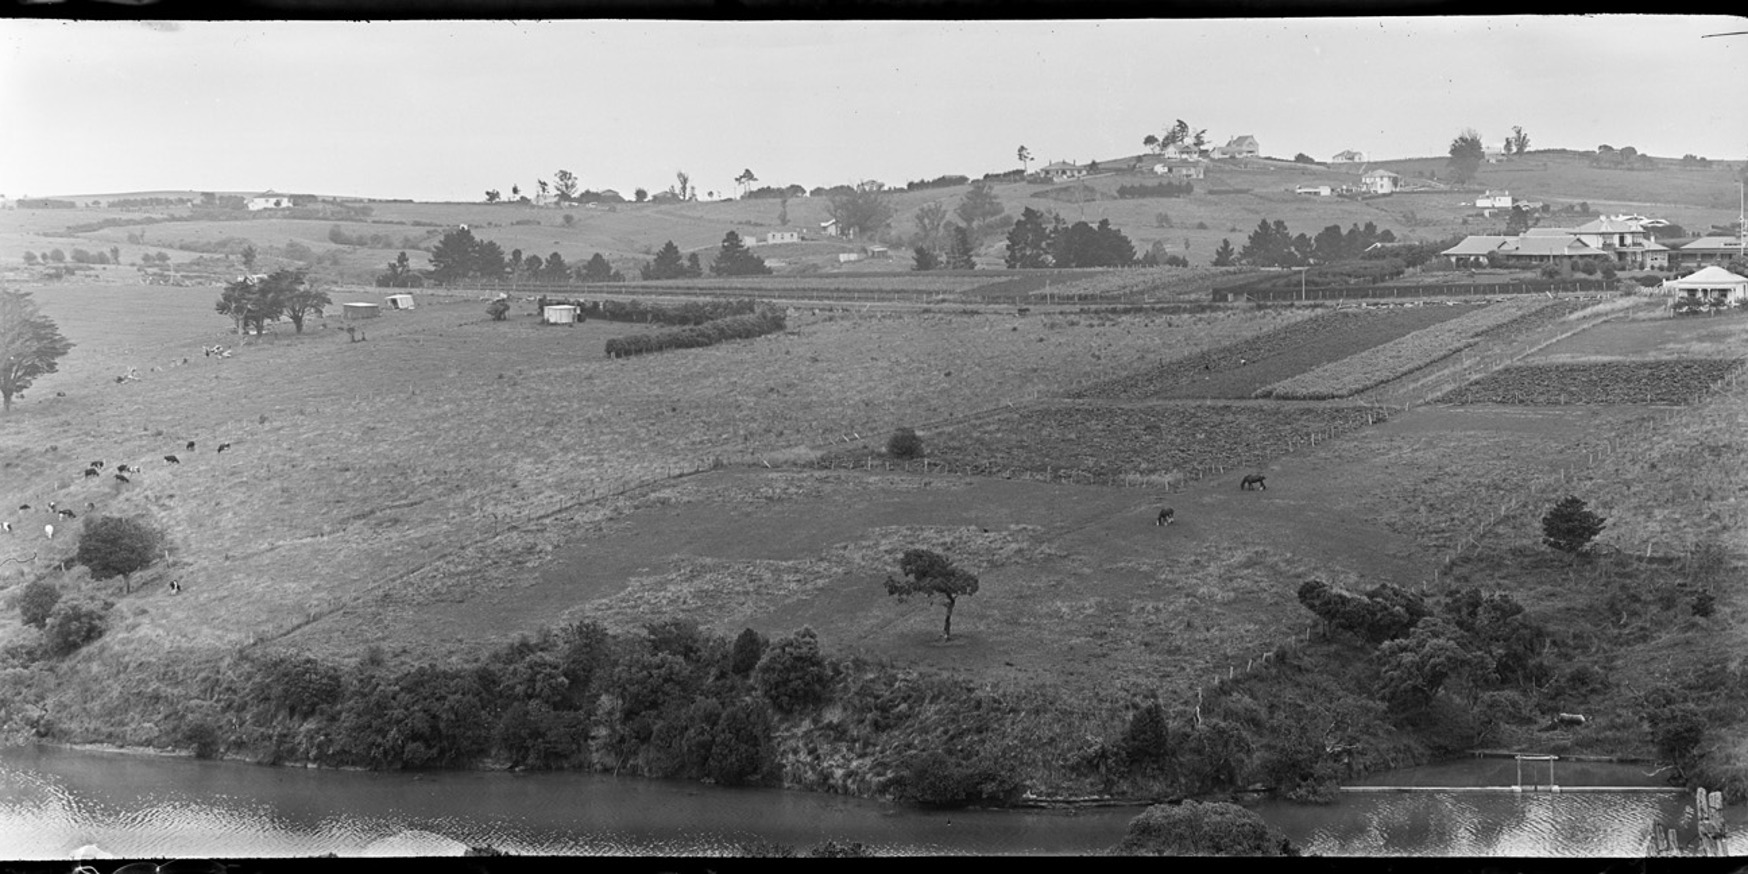 Looking south east over Hobson Bay (foreground) towards Meadowbank (c.1920)